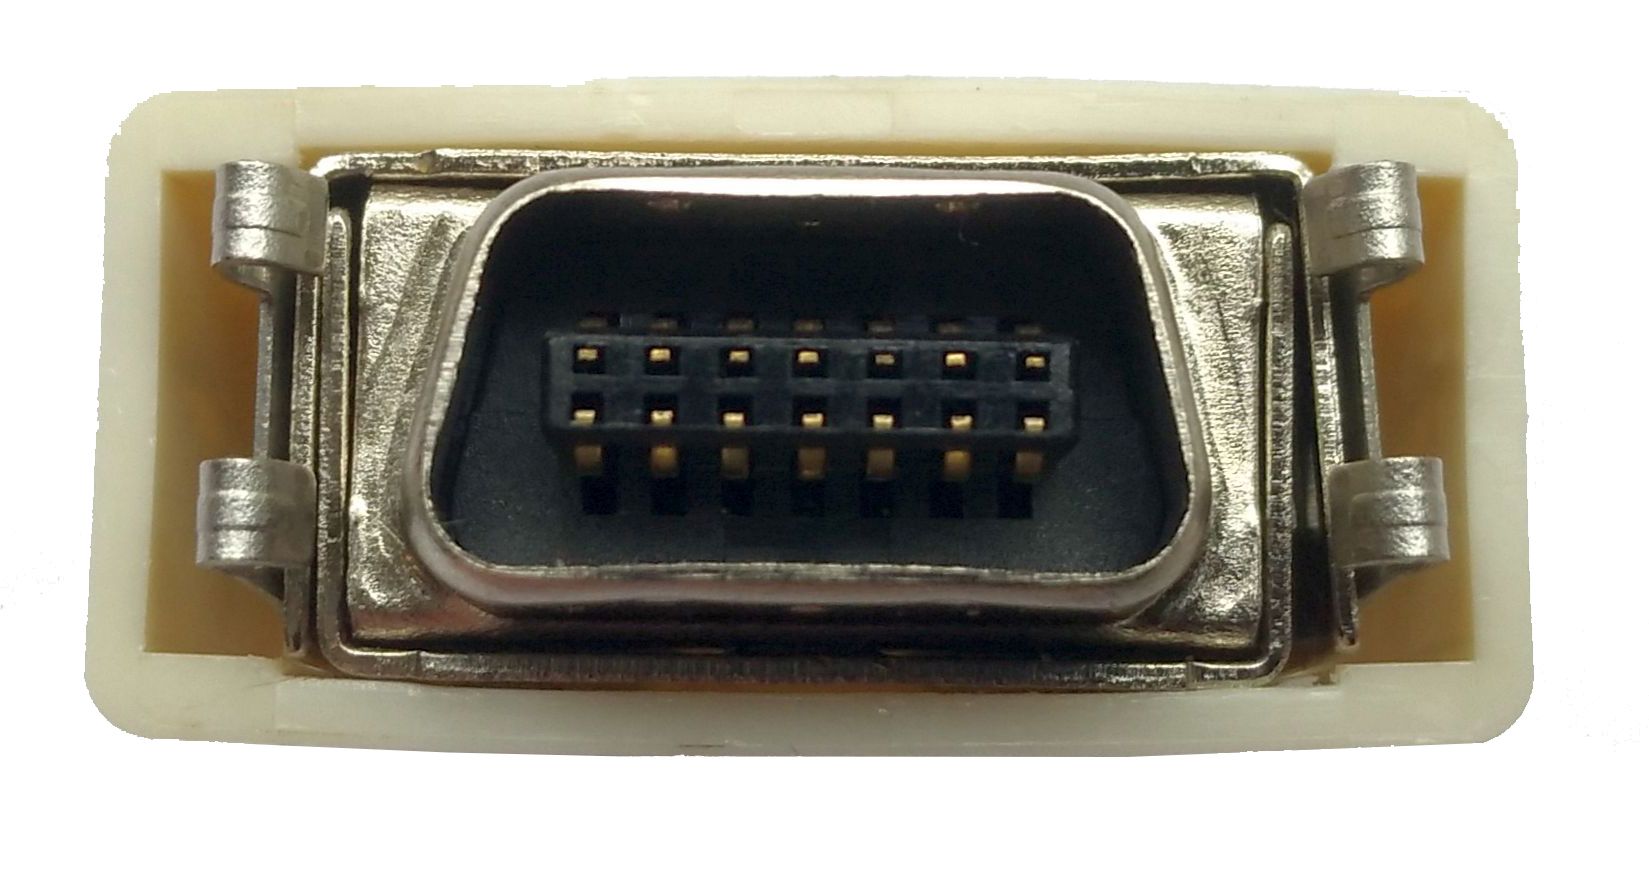 Centronics 14-pin connector met behuizing male voorkant